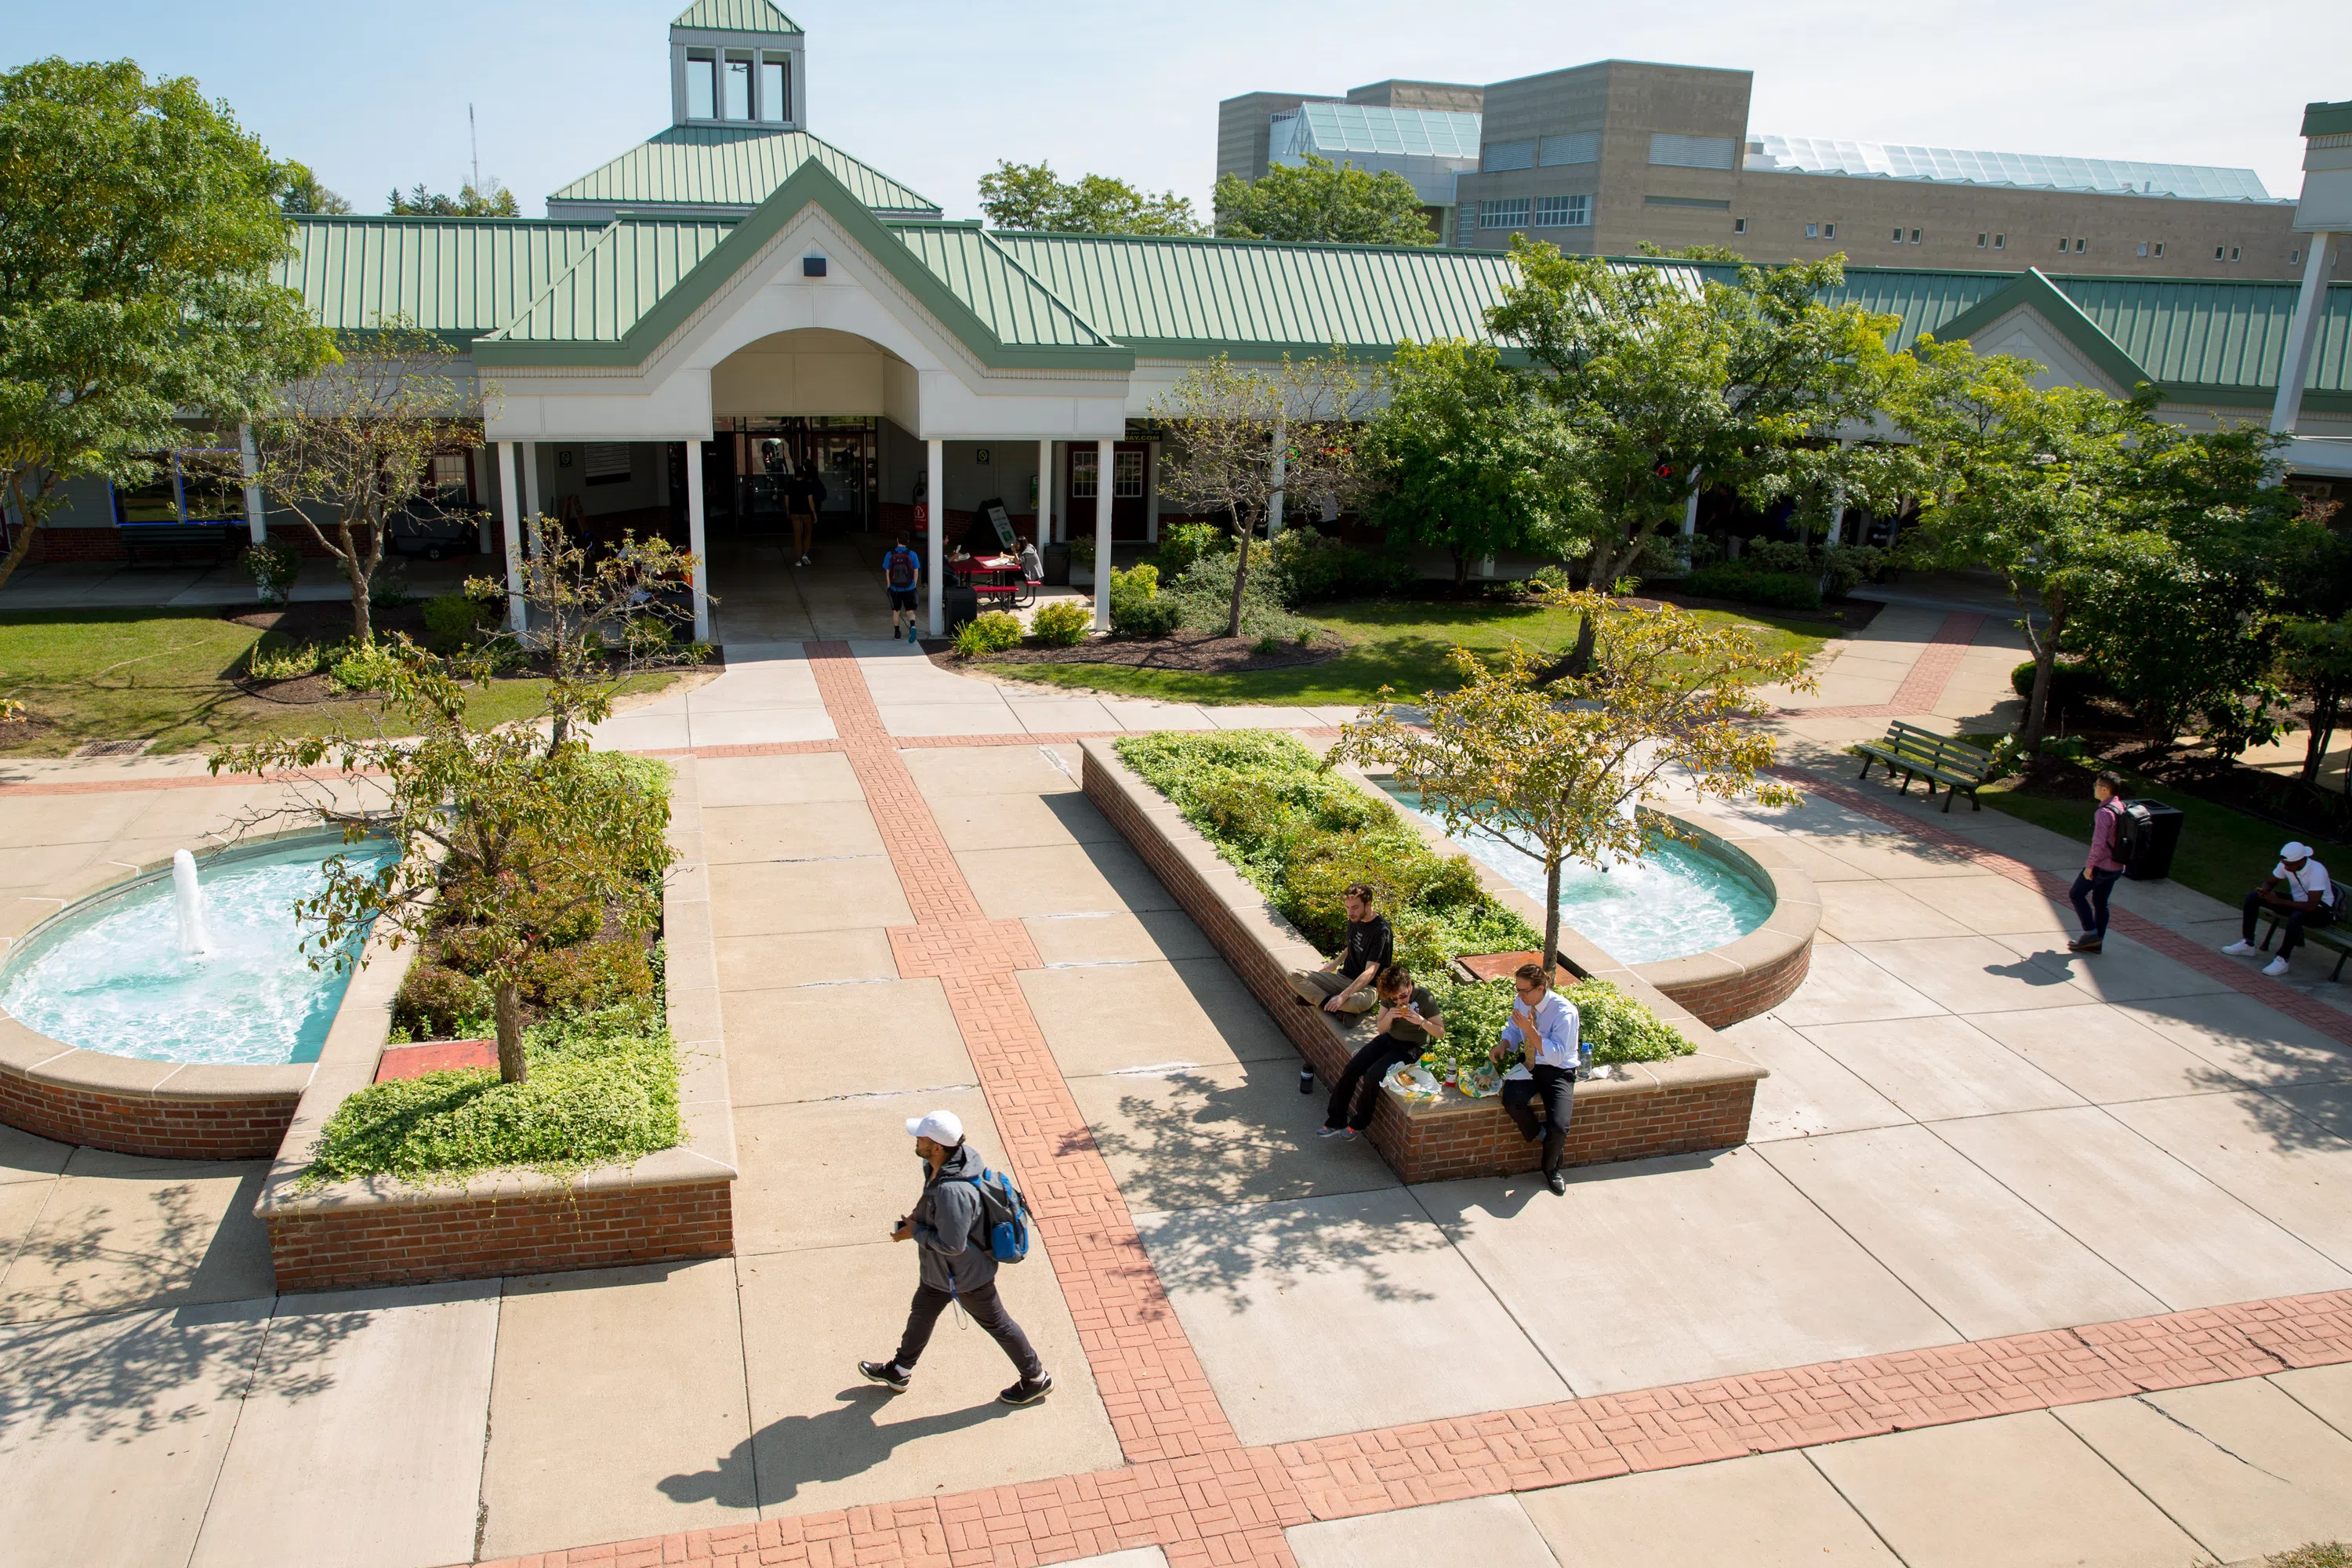 Photo of the UB Commons Courtyard.